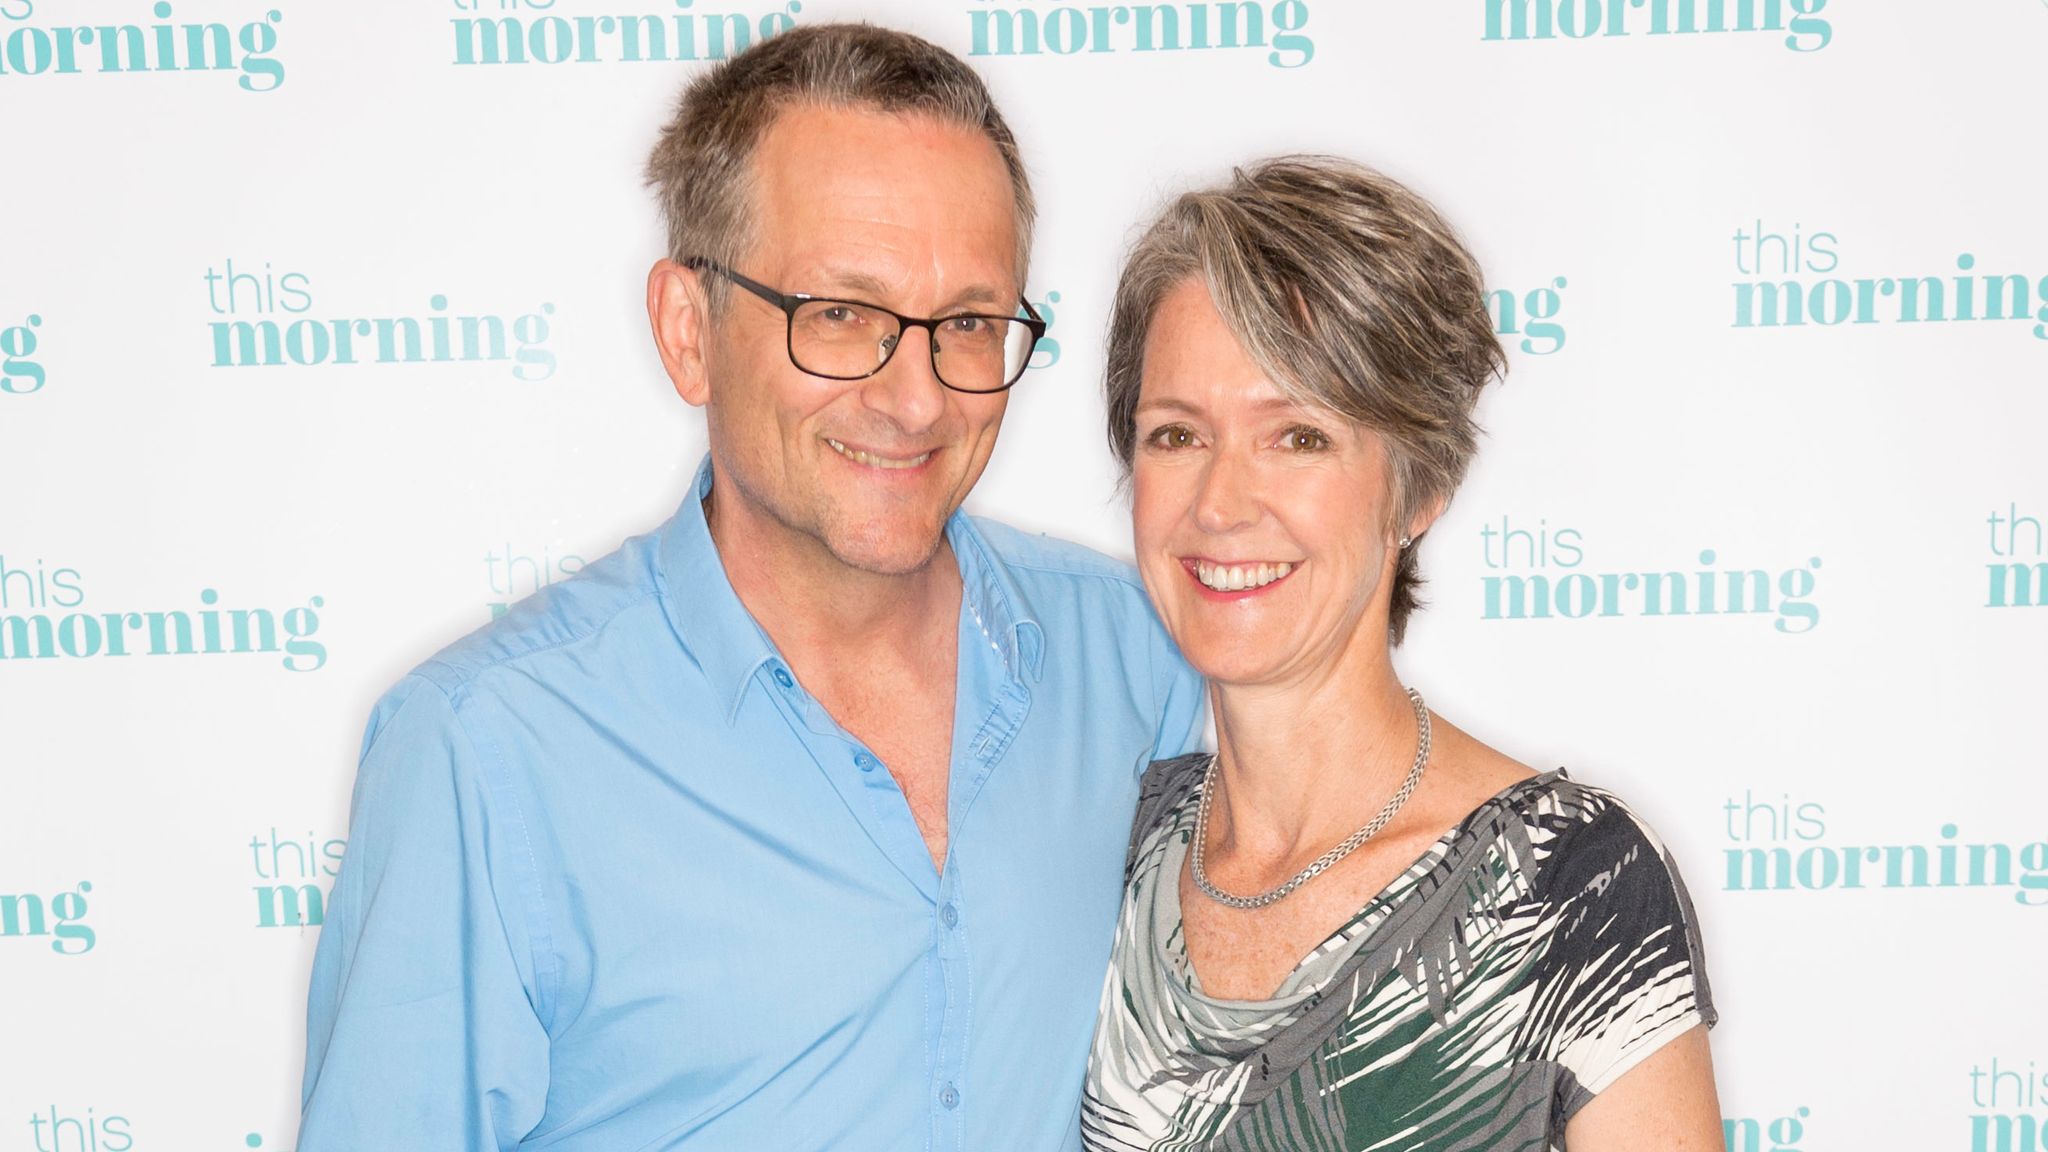 Dr Michael Mosley with wife Clare. Pic: Ken McKay/ITV/Shutterstock